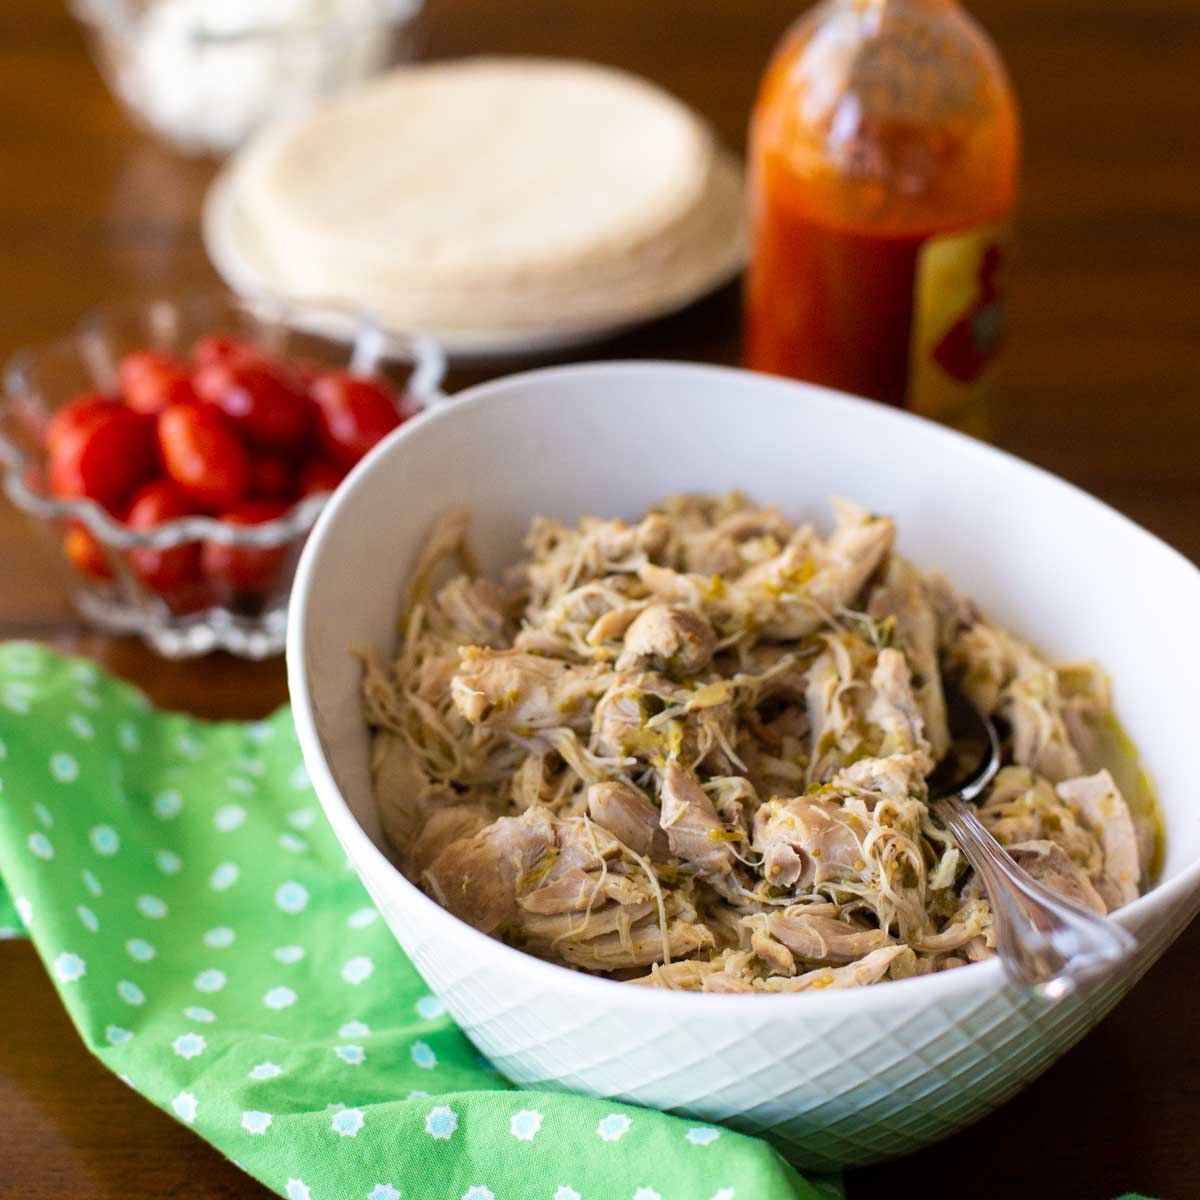 A bowl full of shredded chicken with a spoon. There's a bowl of red tomatoes, a green napkin, and a bottle of hot sauce sitting nearby.